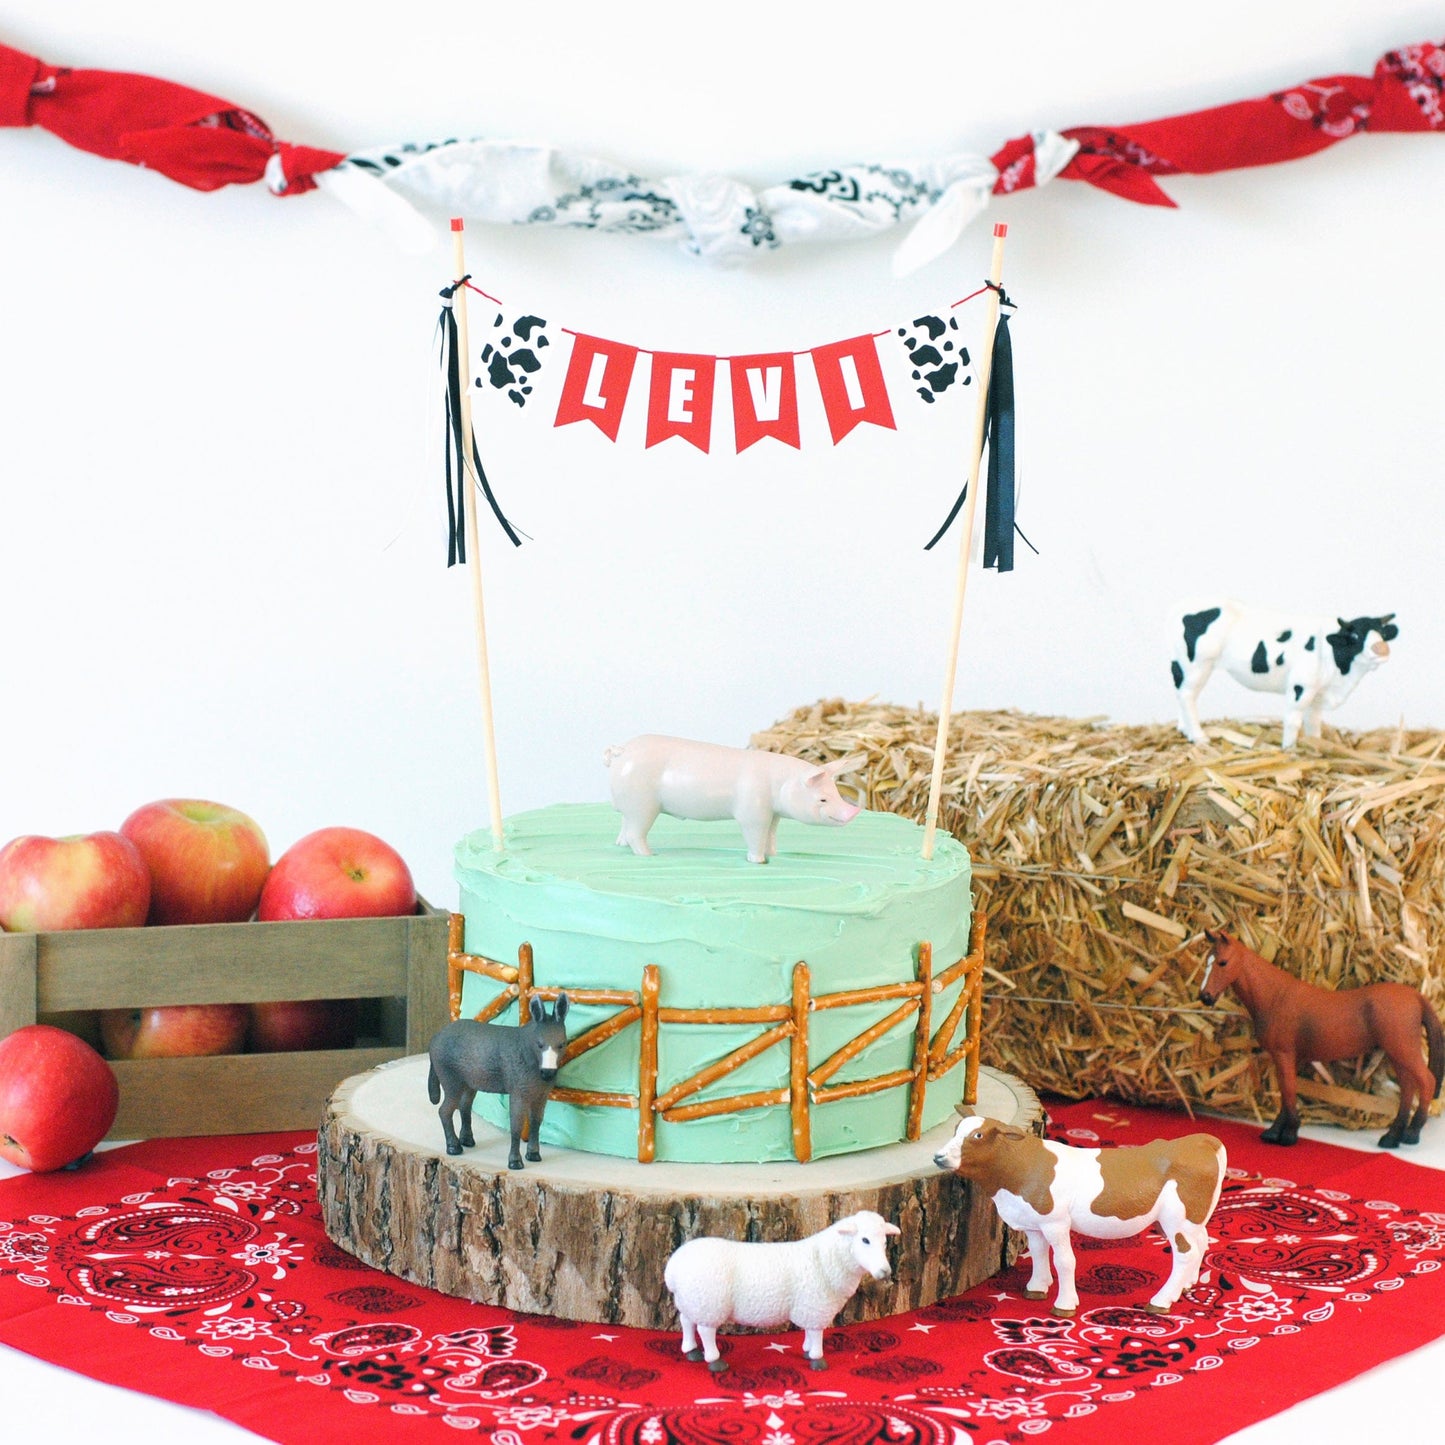 
                  
                    farm birthday party scene with cake and a personalized farm theme cake topper, toy farm animals, hay, apples and a bandana
                  
                